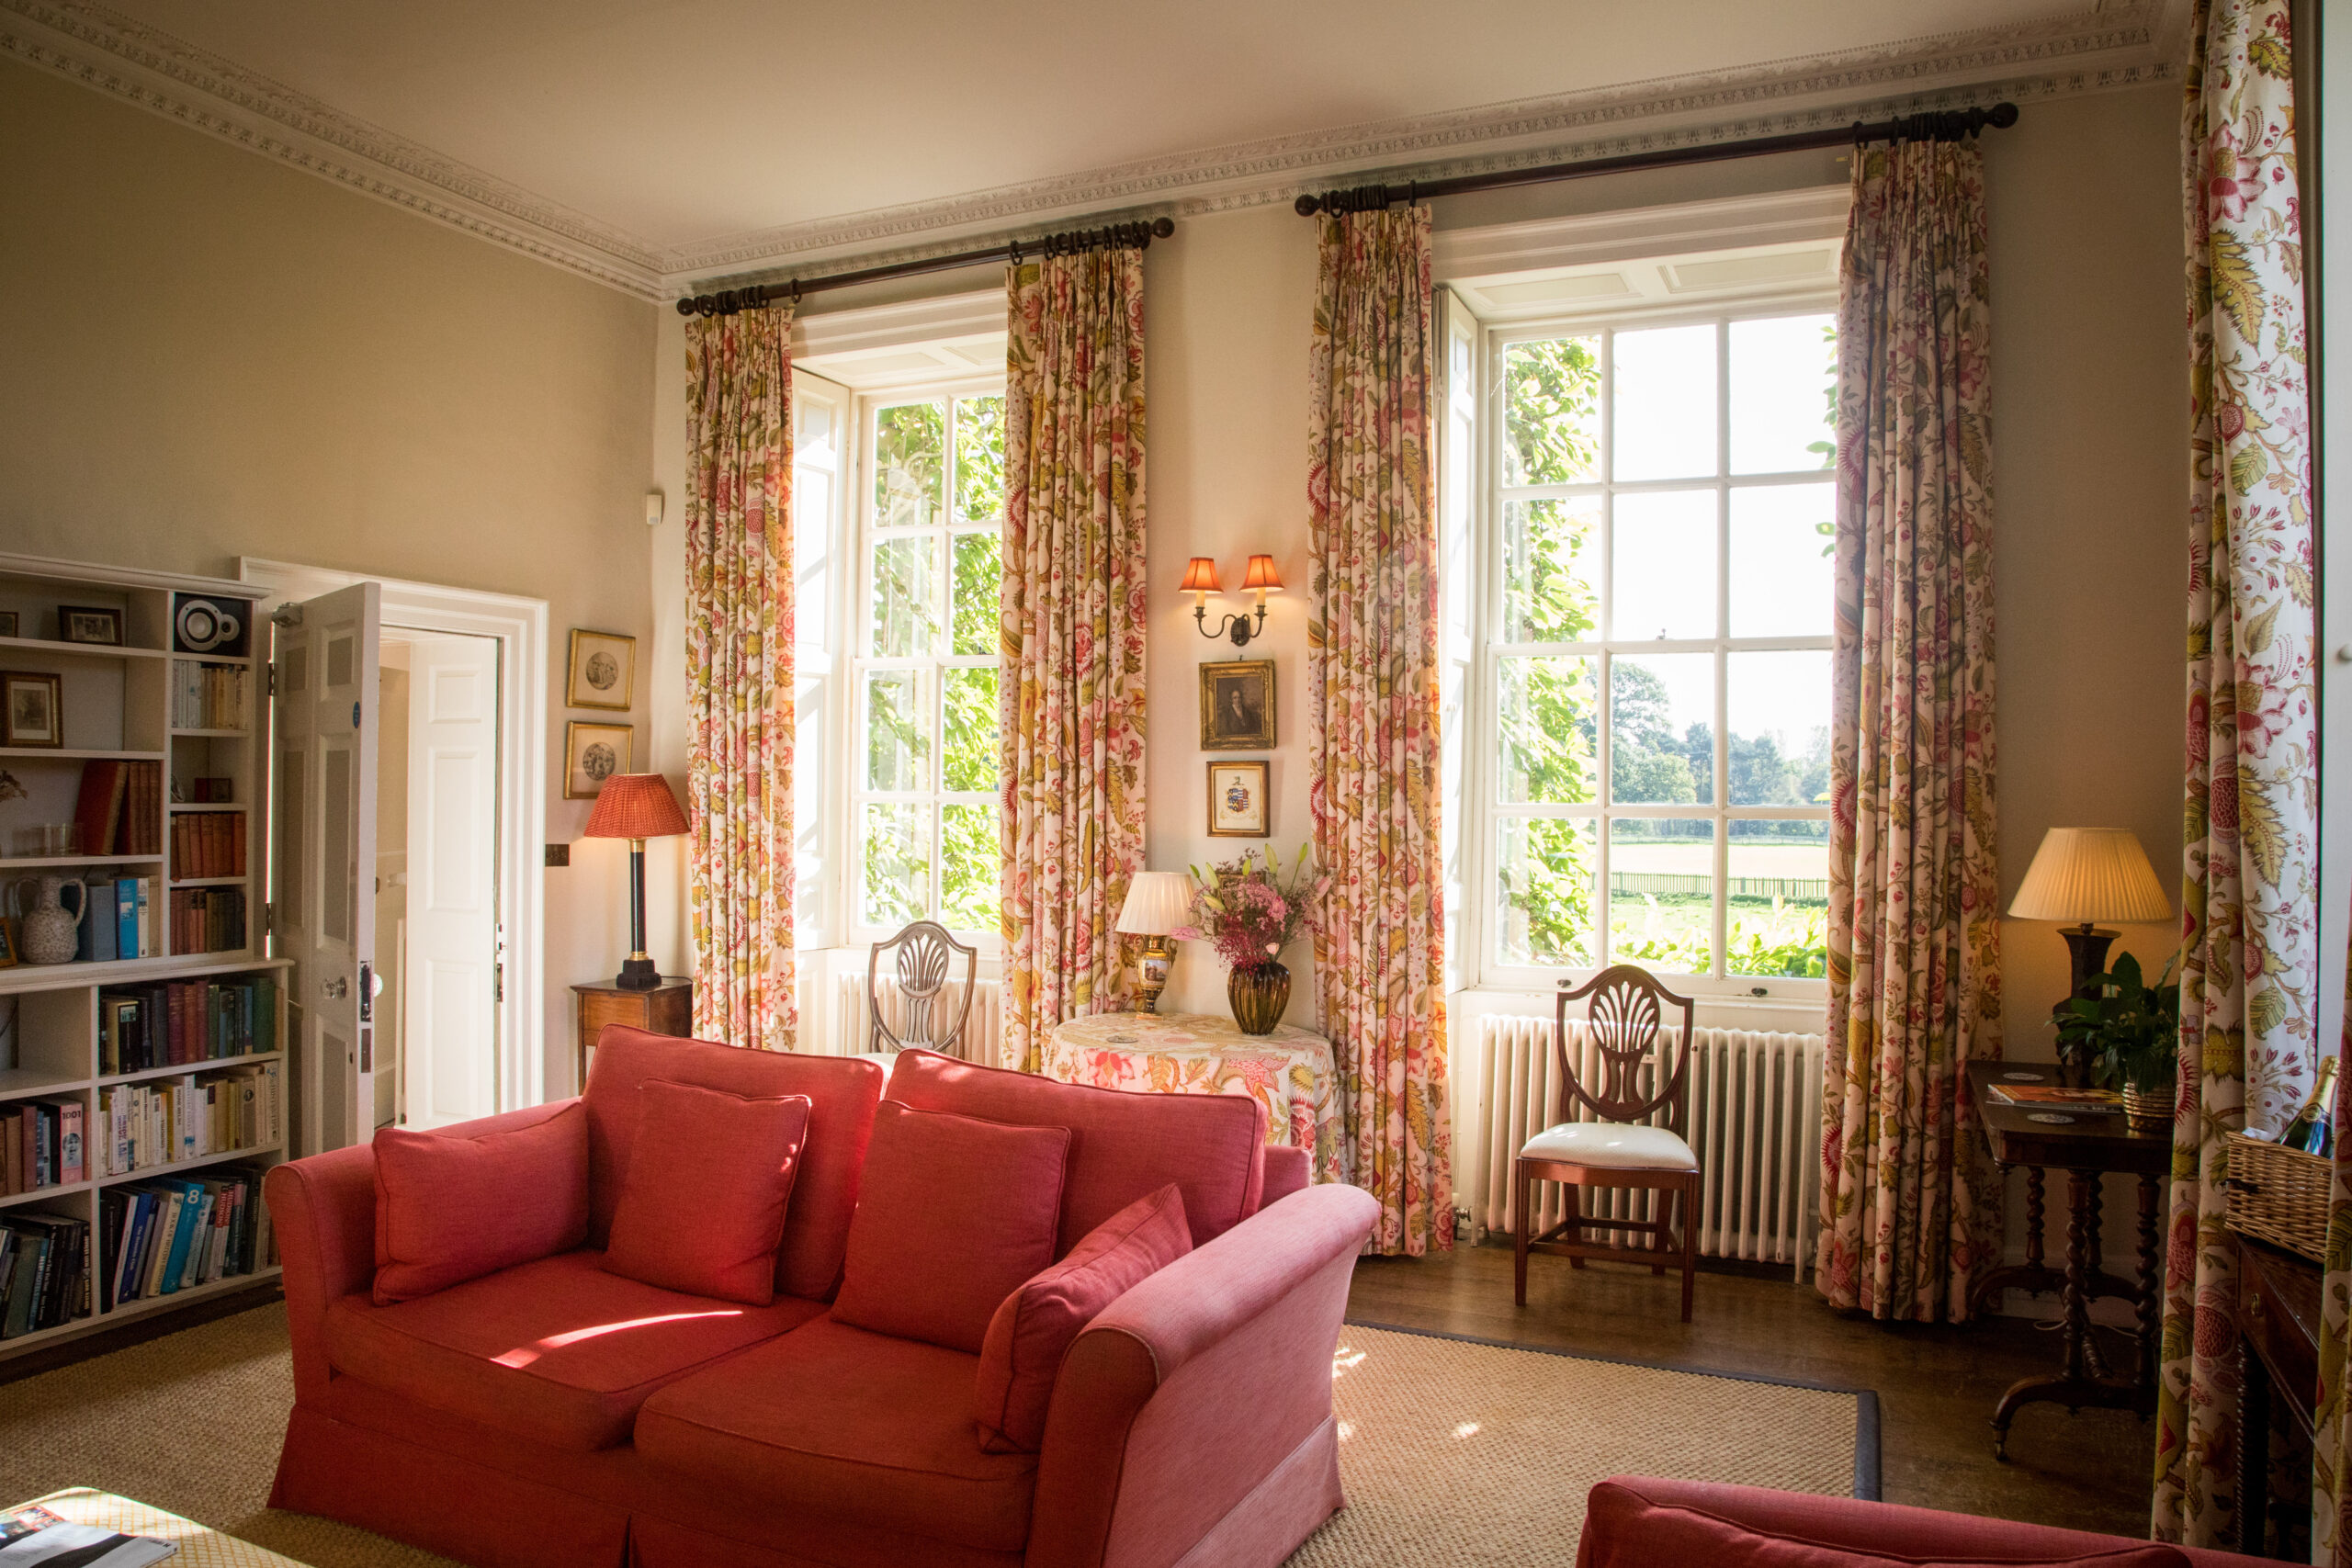 The Sitting Room at luxury wedding venue Iscoyd Park photographed by Helen Baly